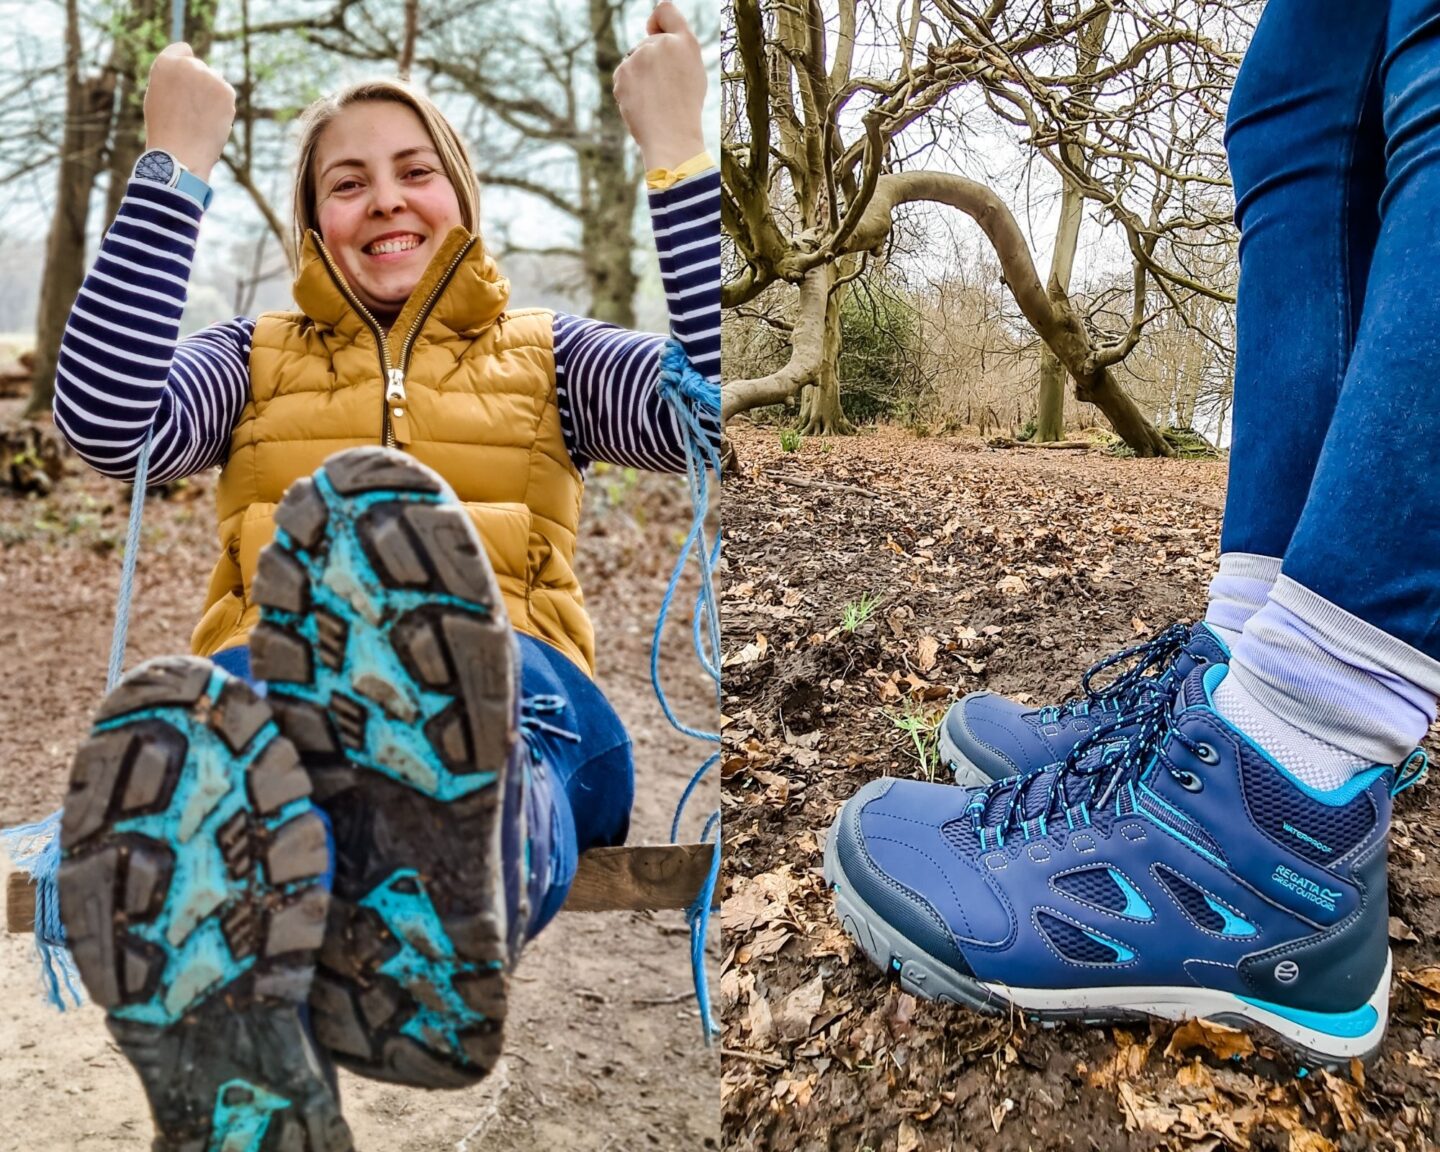 Collage of images showing hiking boots